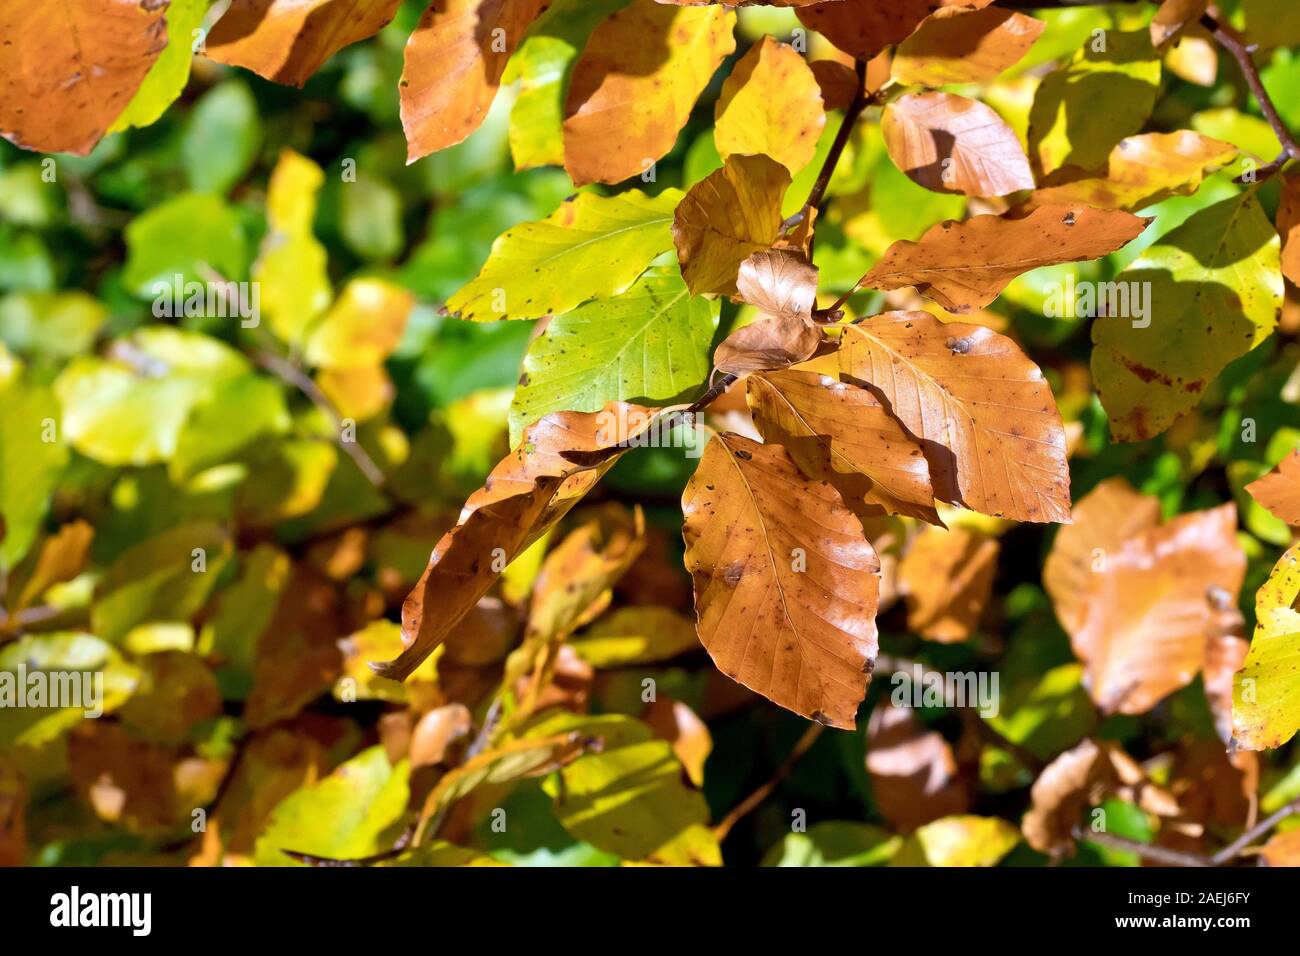 Autumn Beech leaves (fagus sylvatica), as they change colour from green, through yellow, to brown. Stock Photo